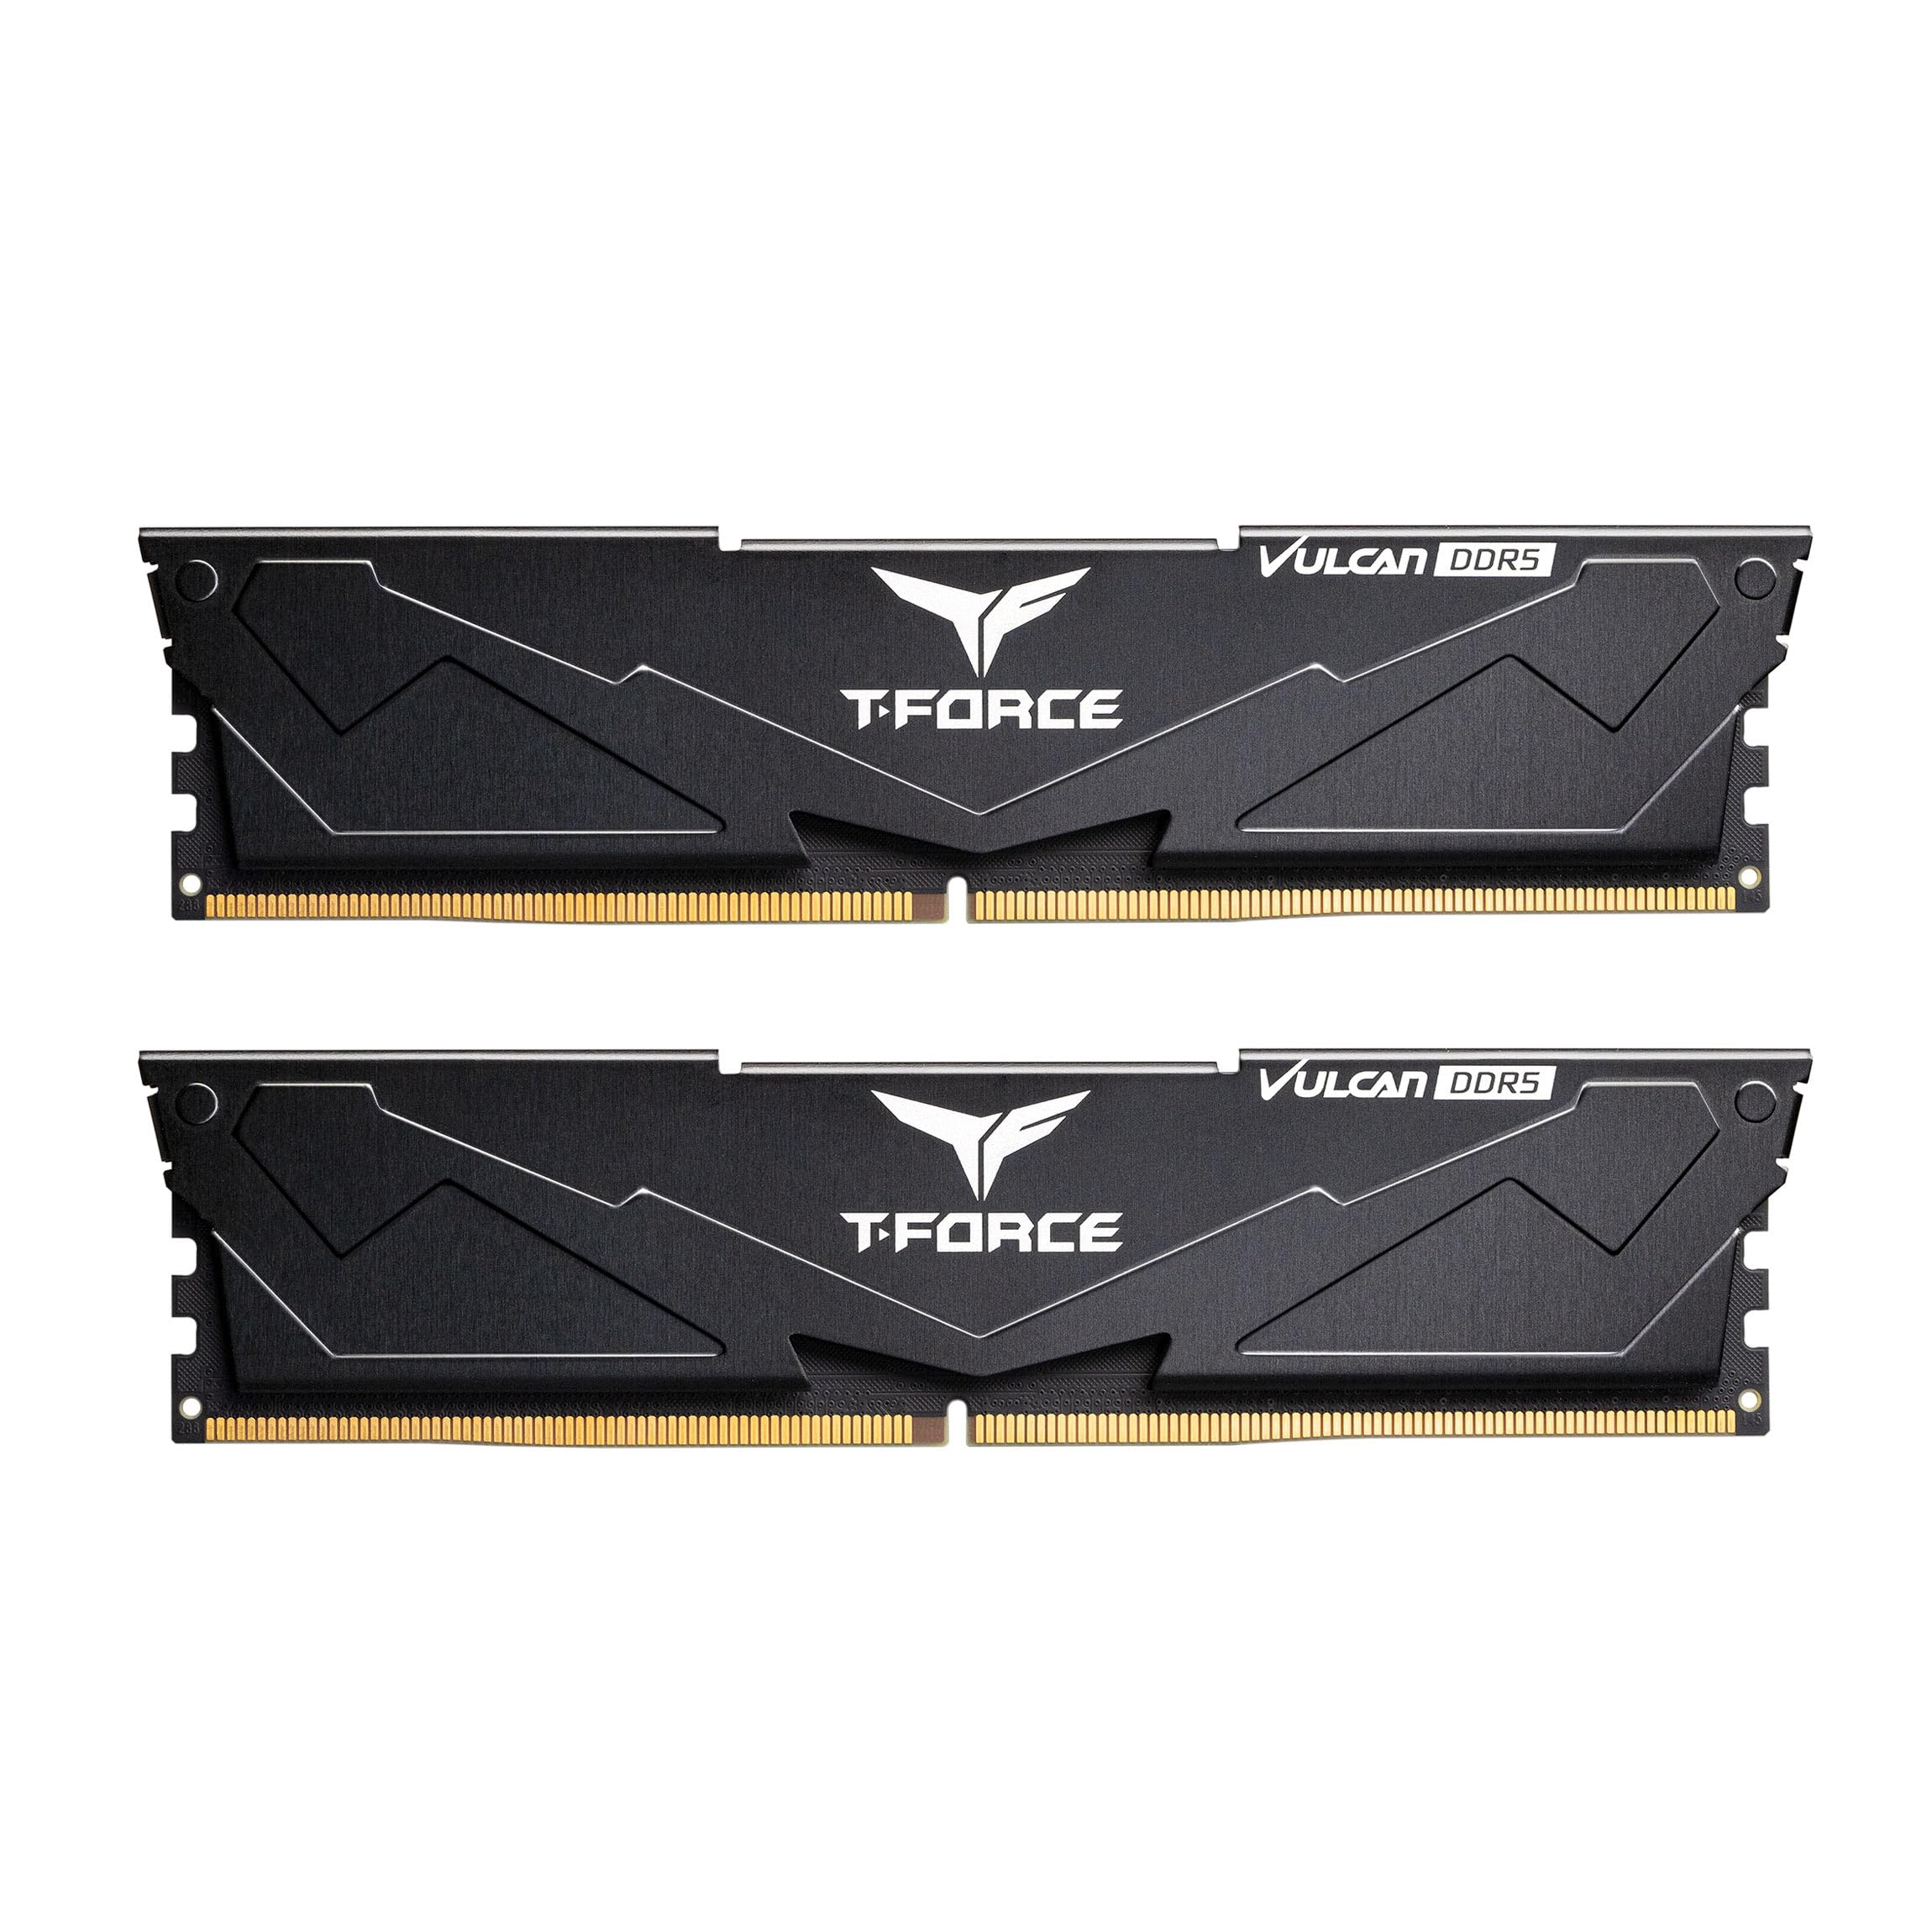 TEAMGROUP T-force Vulcan 16GB | DDR5 5600MHZ RAM (8x2)